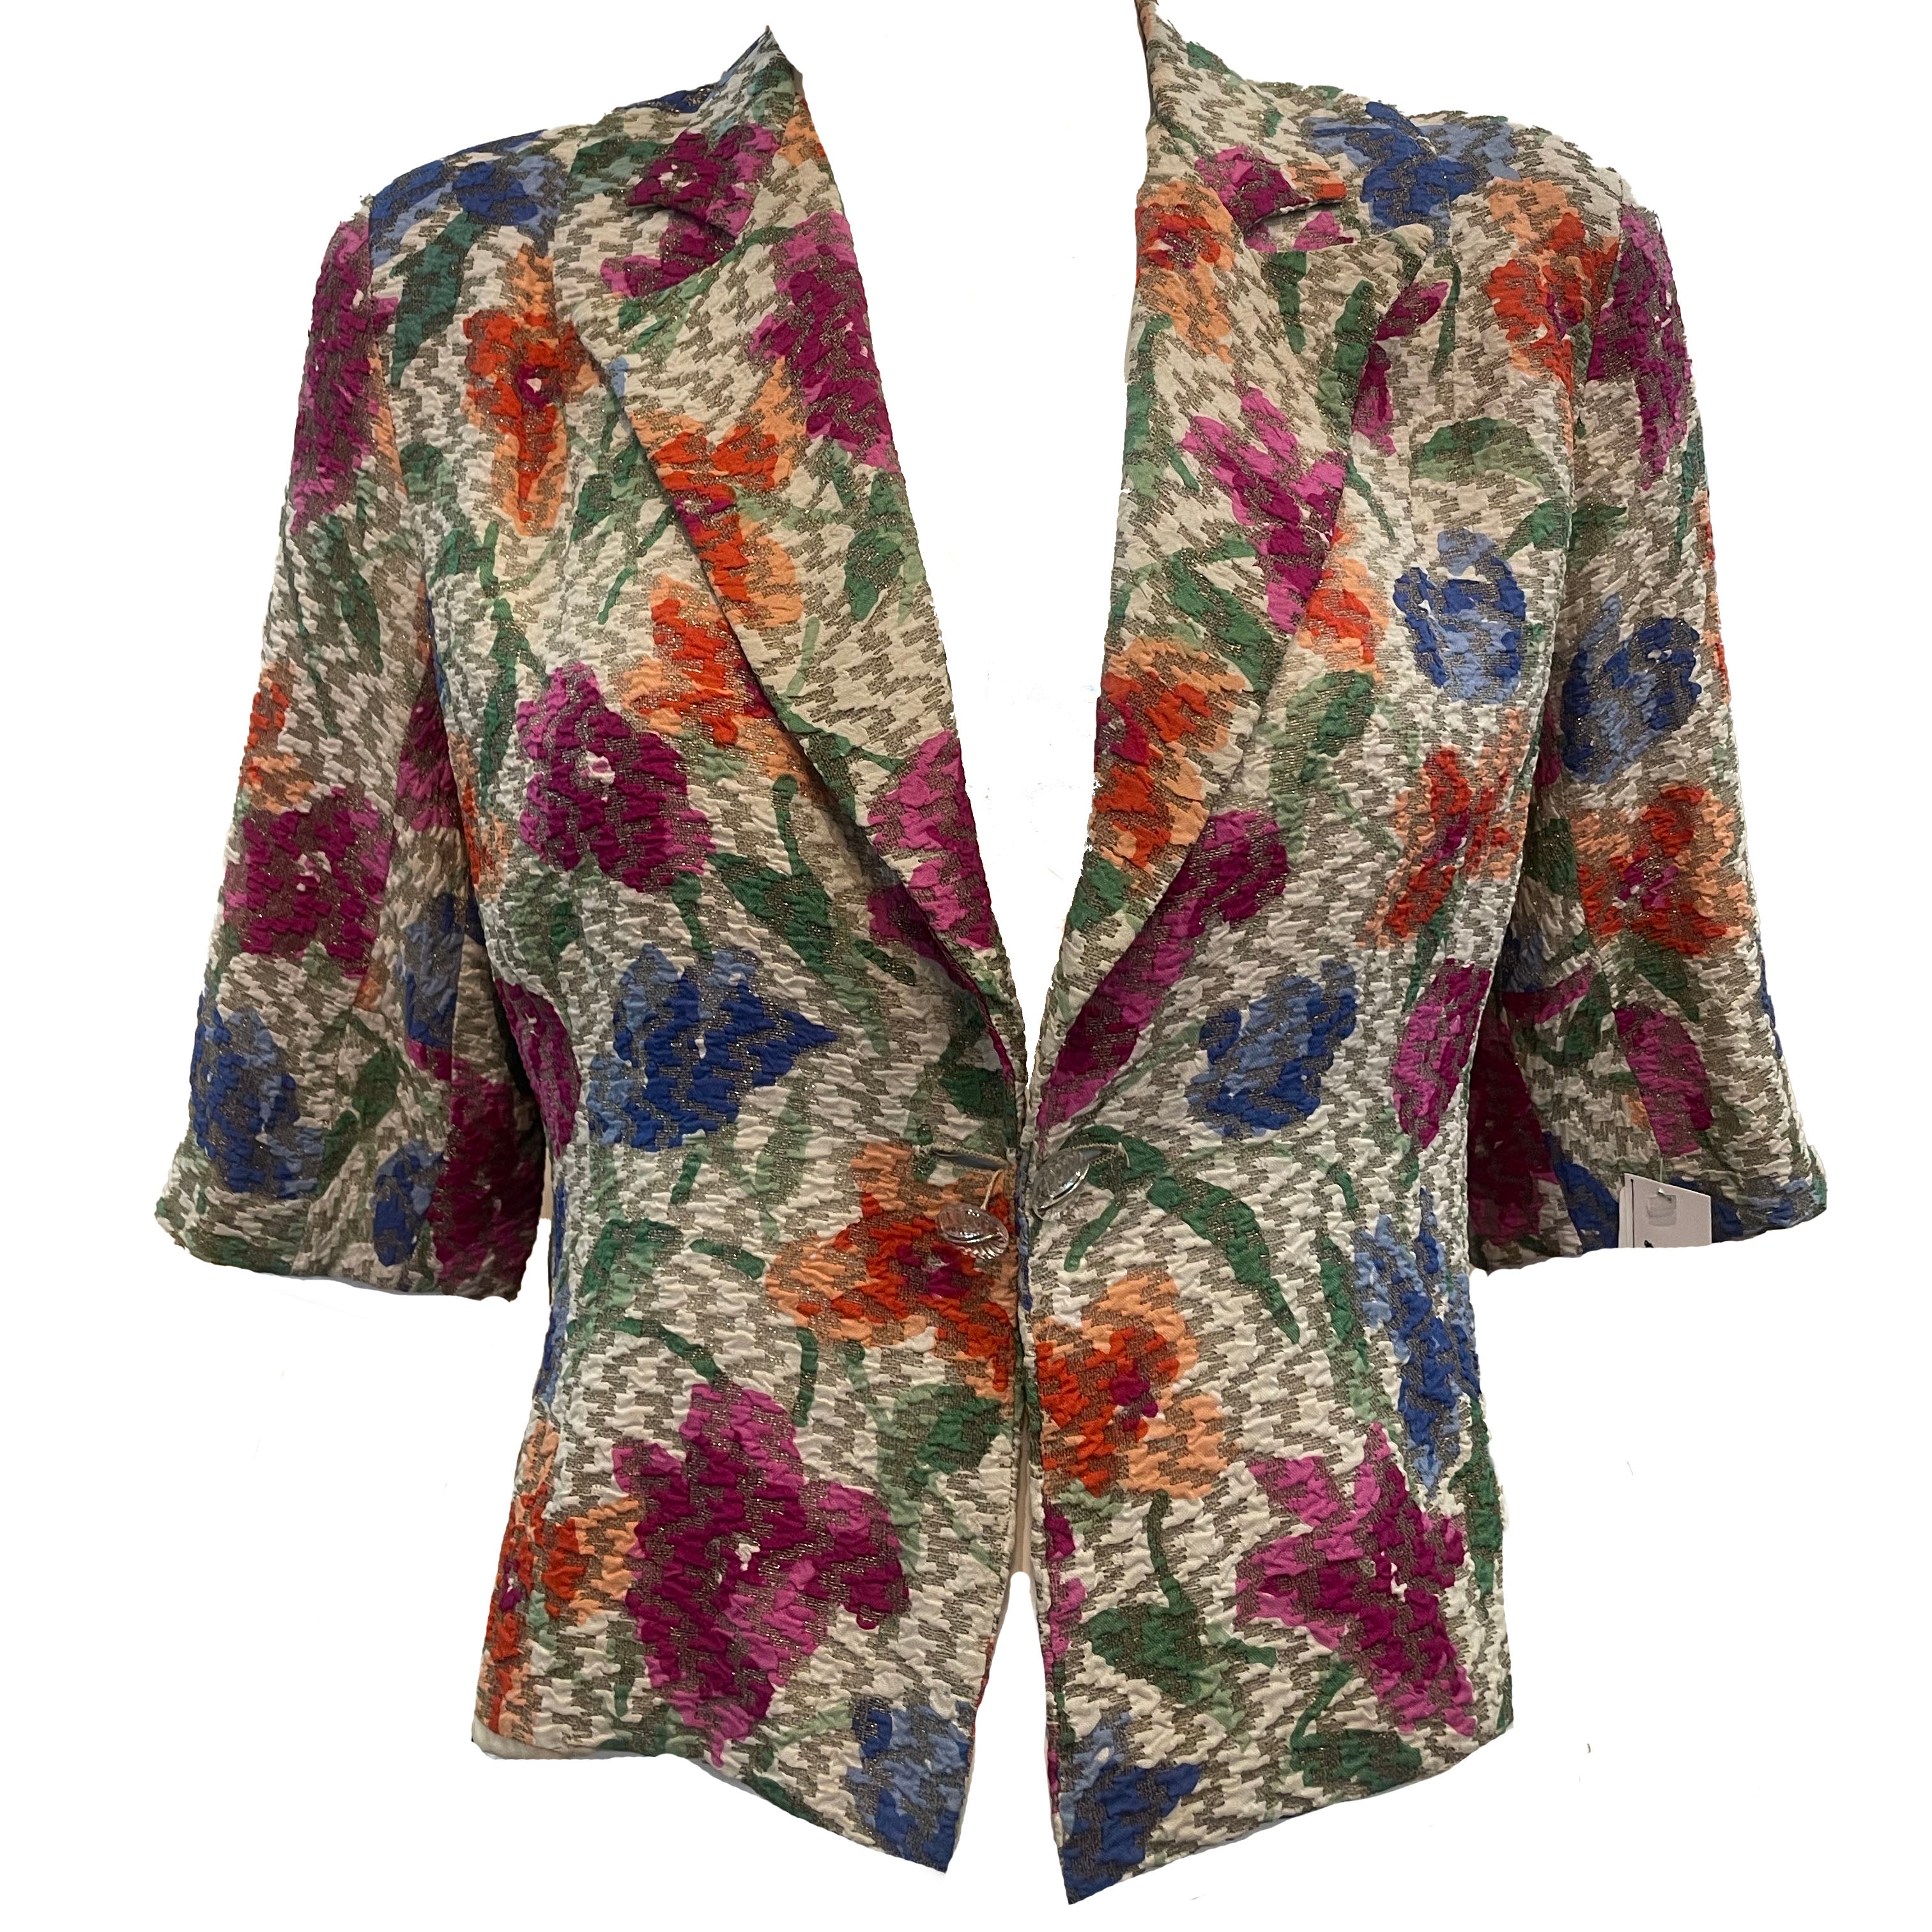 30s Gold Lame Floral Evening Jacket FRONT 1 of 5